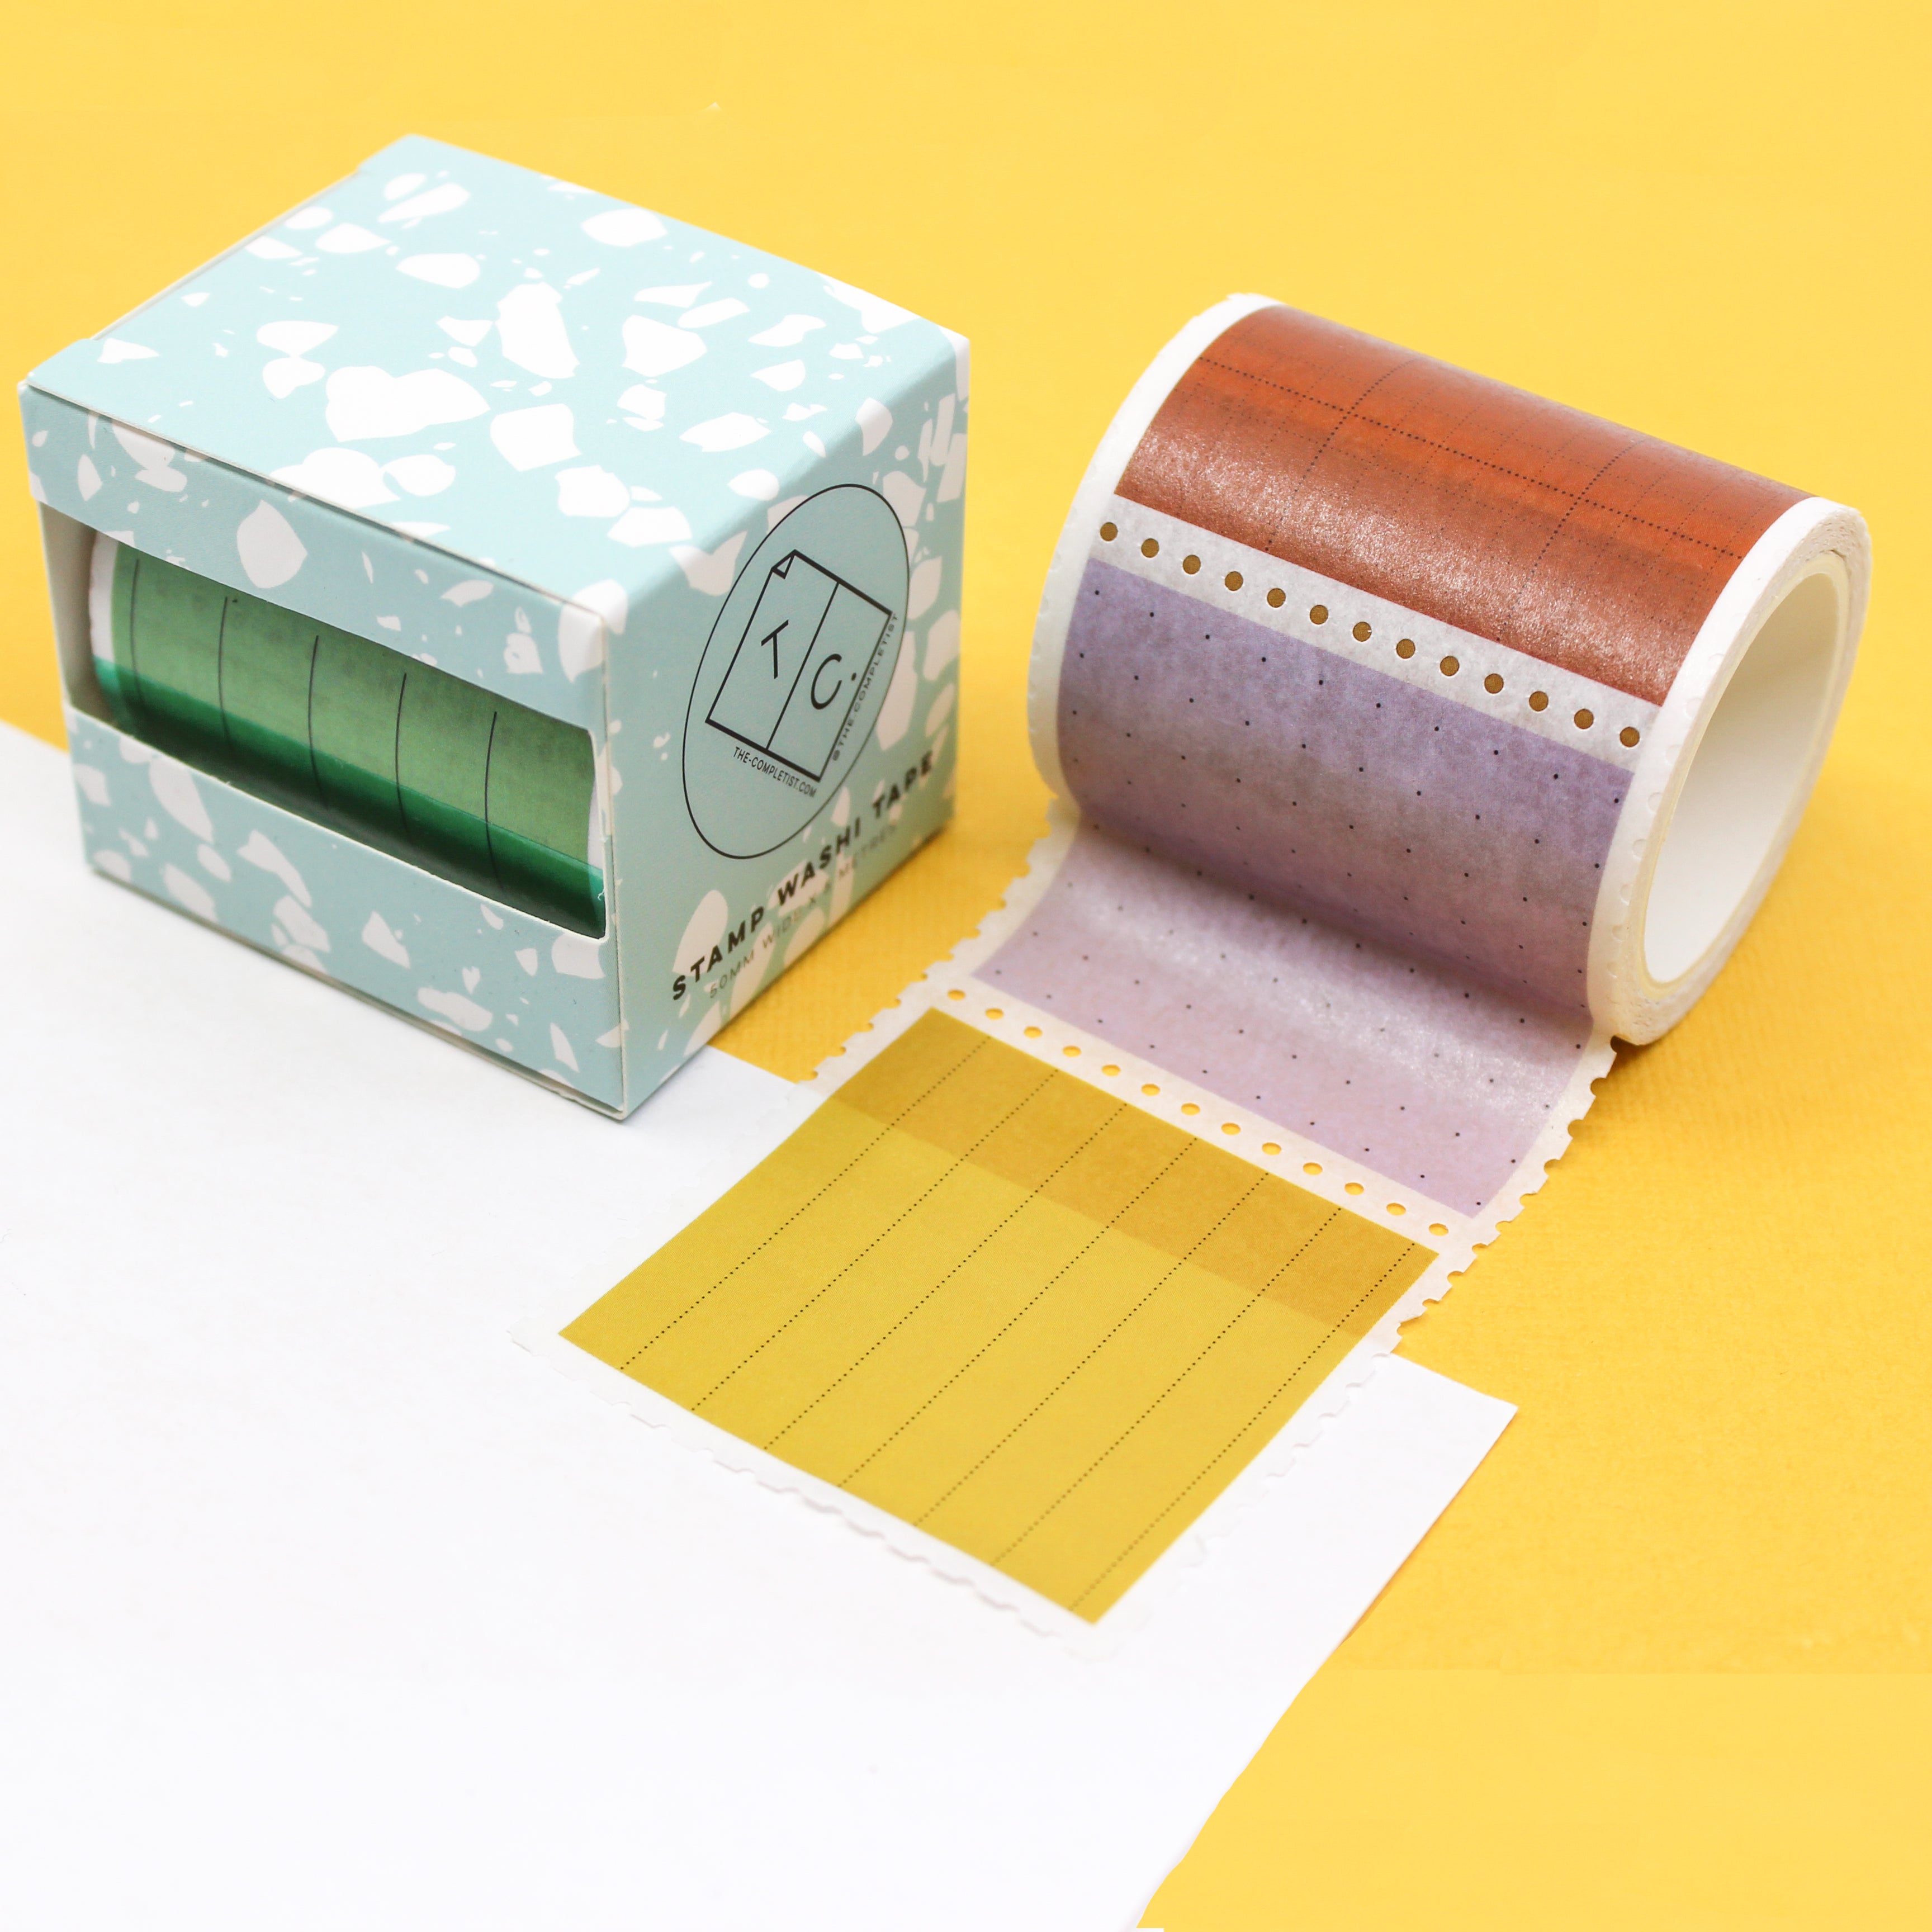 Grade School Paper Pattern Washi Tape, Calendaring Tape, School Grid Washi,  Planner Tapes, Back to School Stickers BBB Supplies R-GH1093 